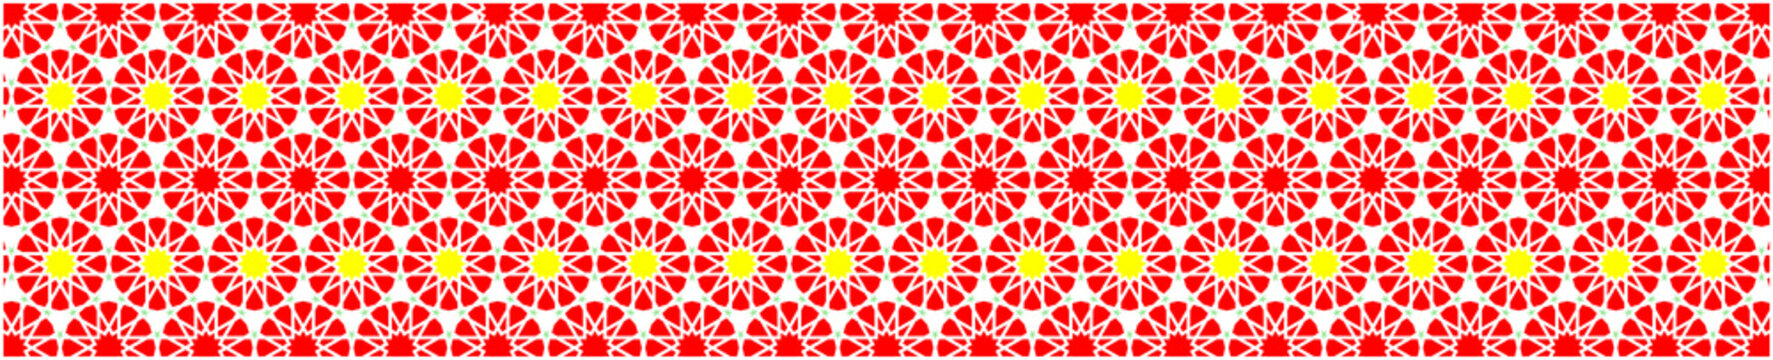 Elegant decorative border made up of polygons and stars with red yellow and green colors